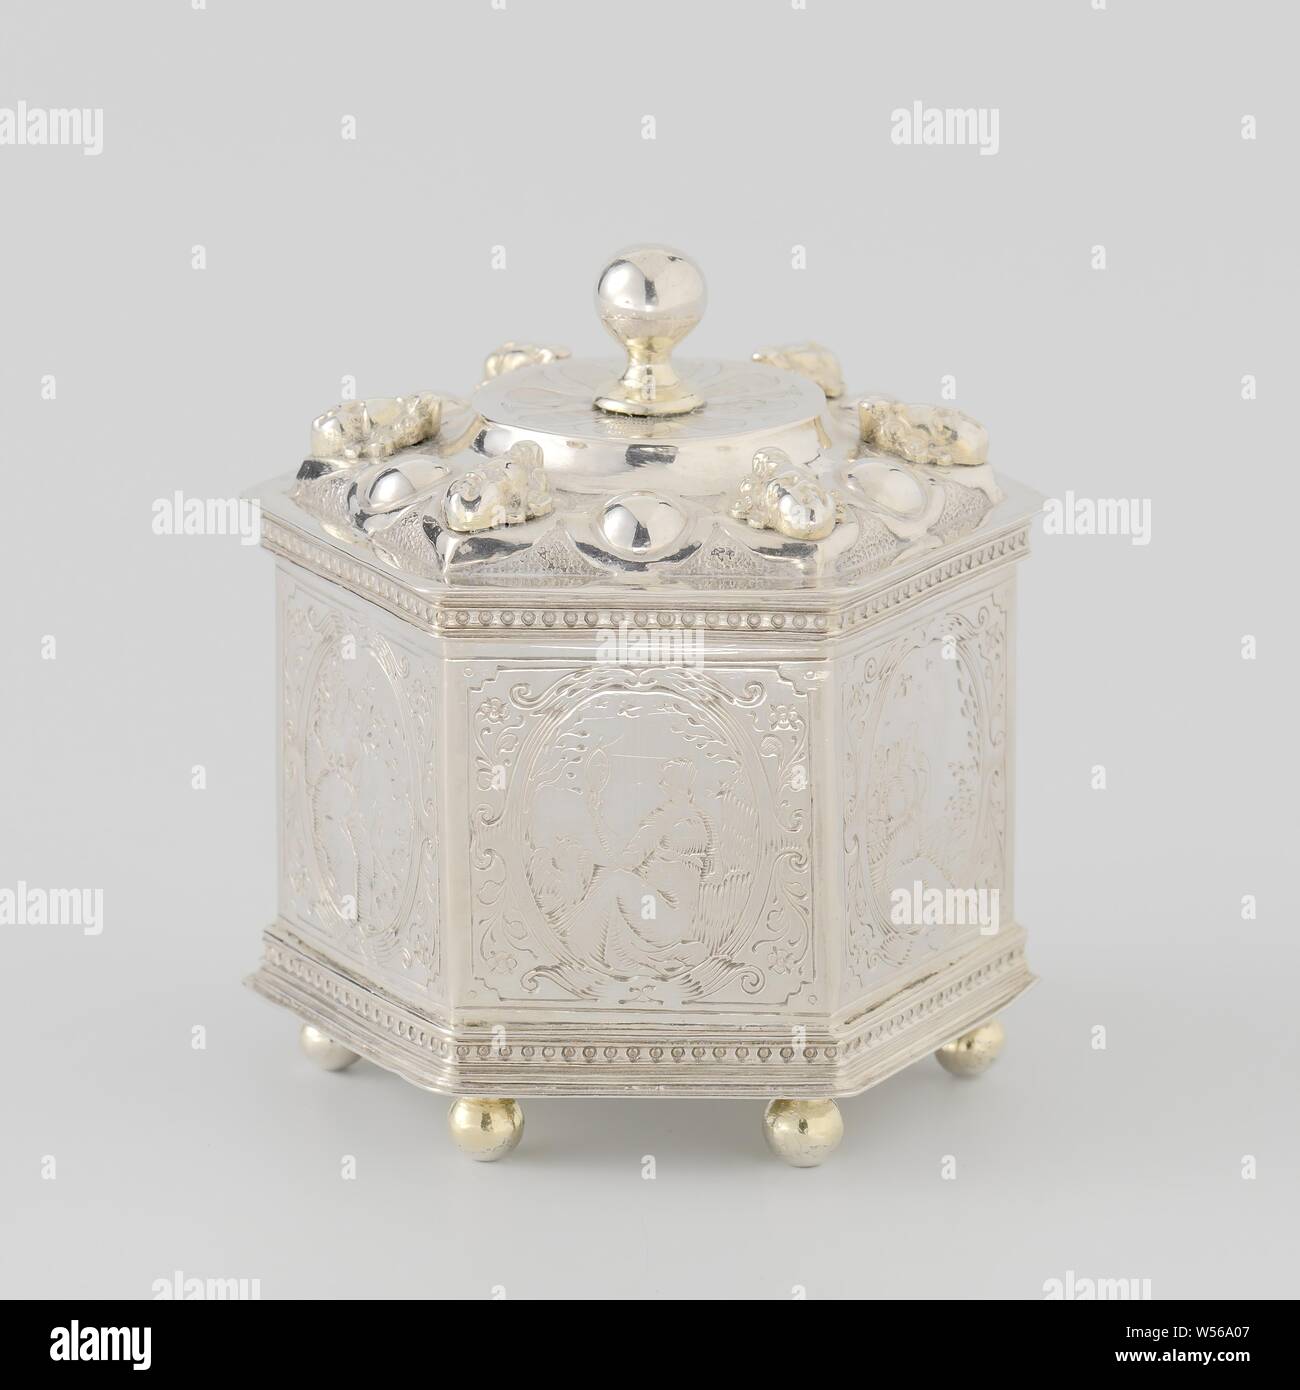 Bun box, Hexagonal bun box of silver. Engraved representations on the sides: Love, Faithfulness, Caution, Flowering, Music and Fertility, Prudence, 'Prudentia', 'Prudenza' (Ripa), one of the Four Cardinal Virtues, anonymous, Friesland, 1600 - 1650, silver (metal), h 6.5 cm × d 5.5 cm Stock Photo